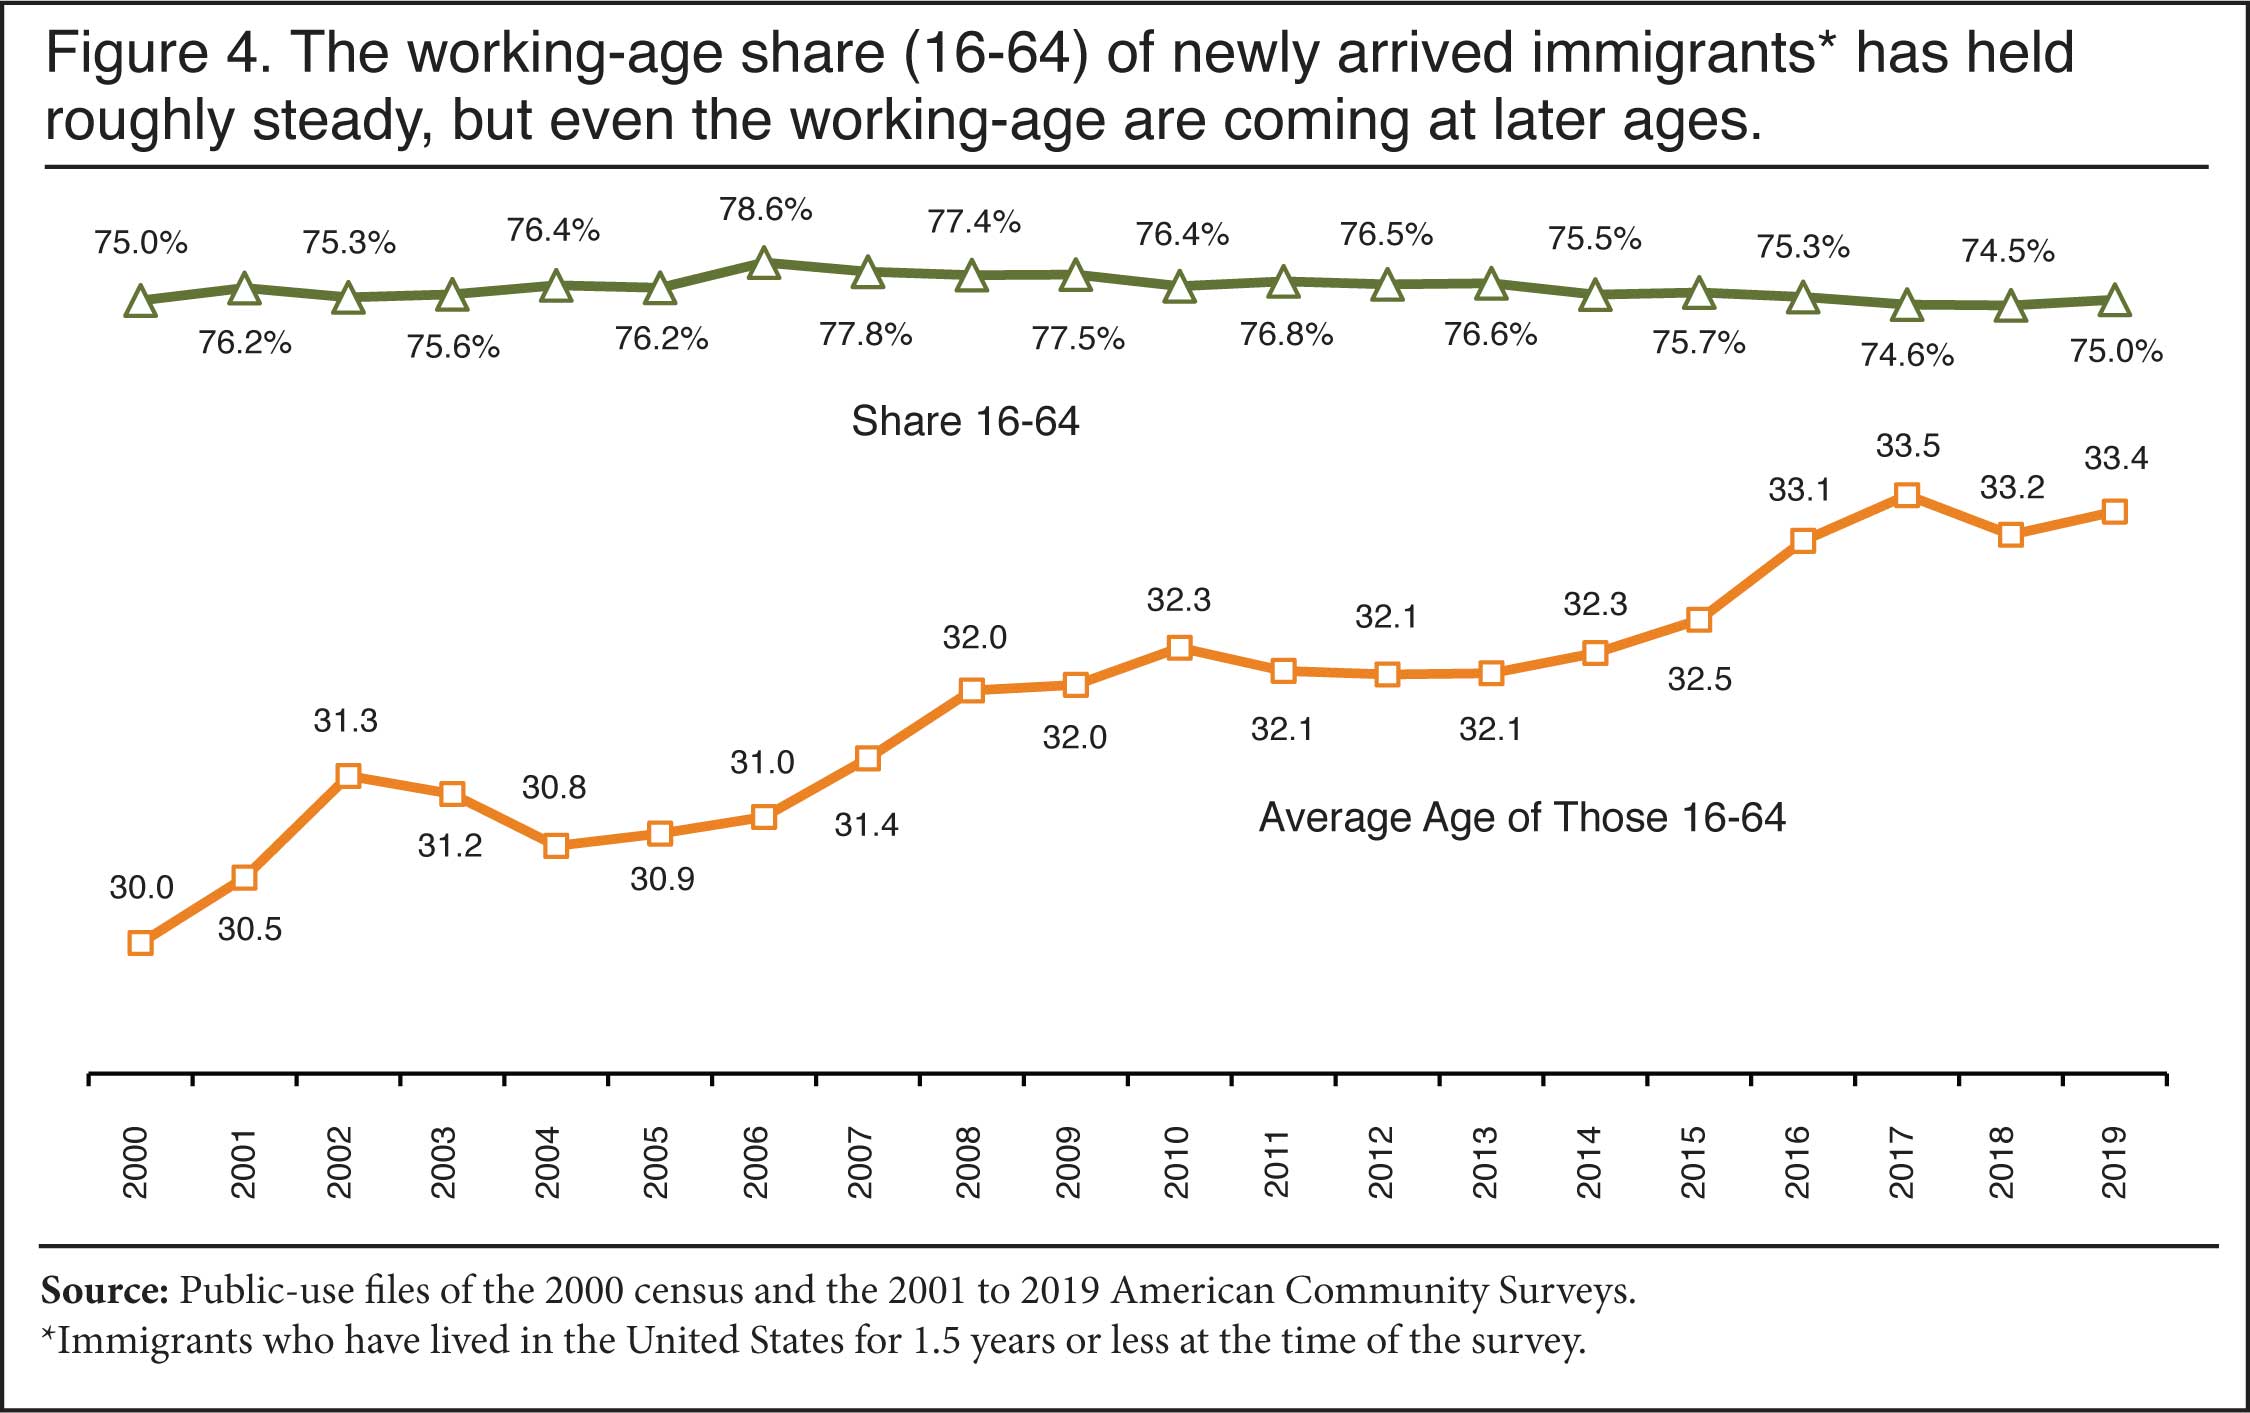 Graph: The working age share of newly arrived immigrants has held roughly steady, but even the working age are coming at later ages